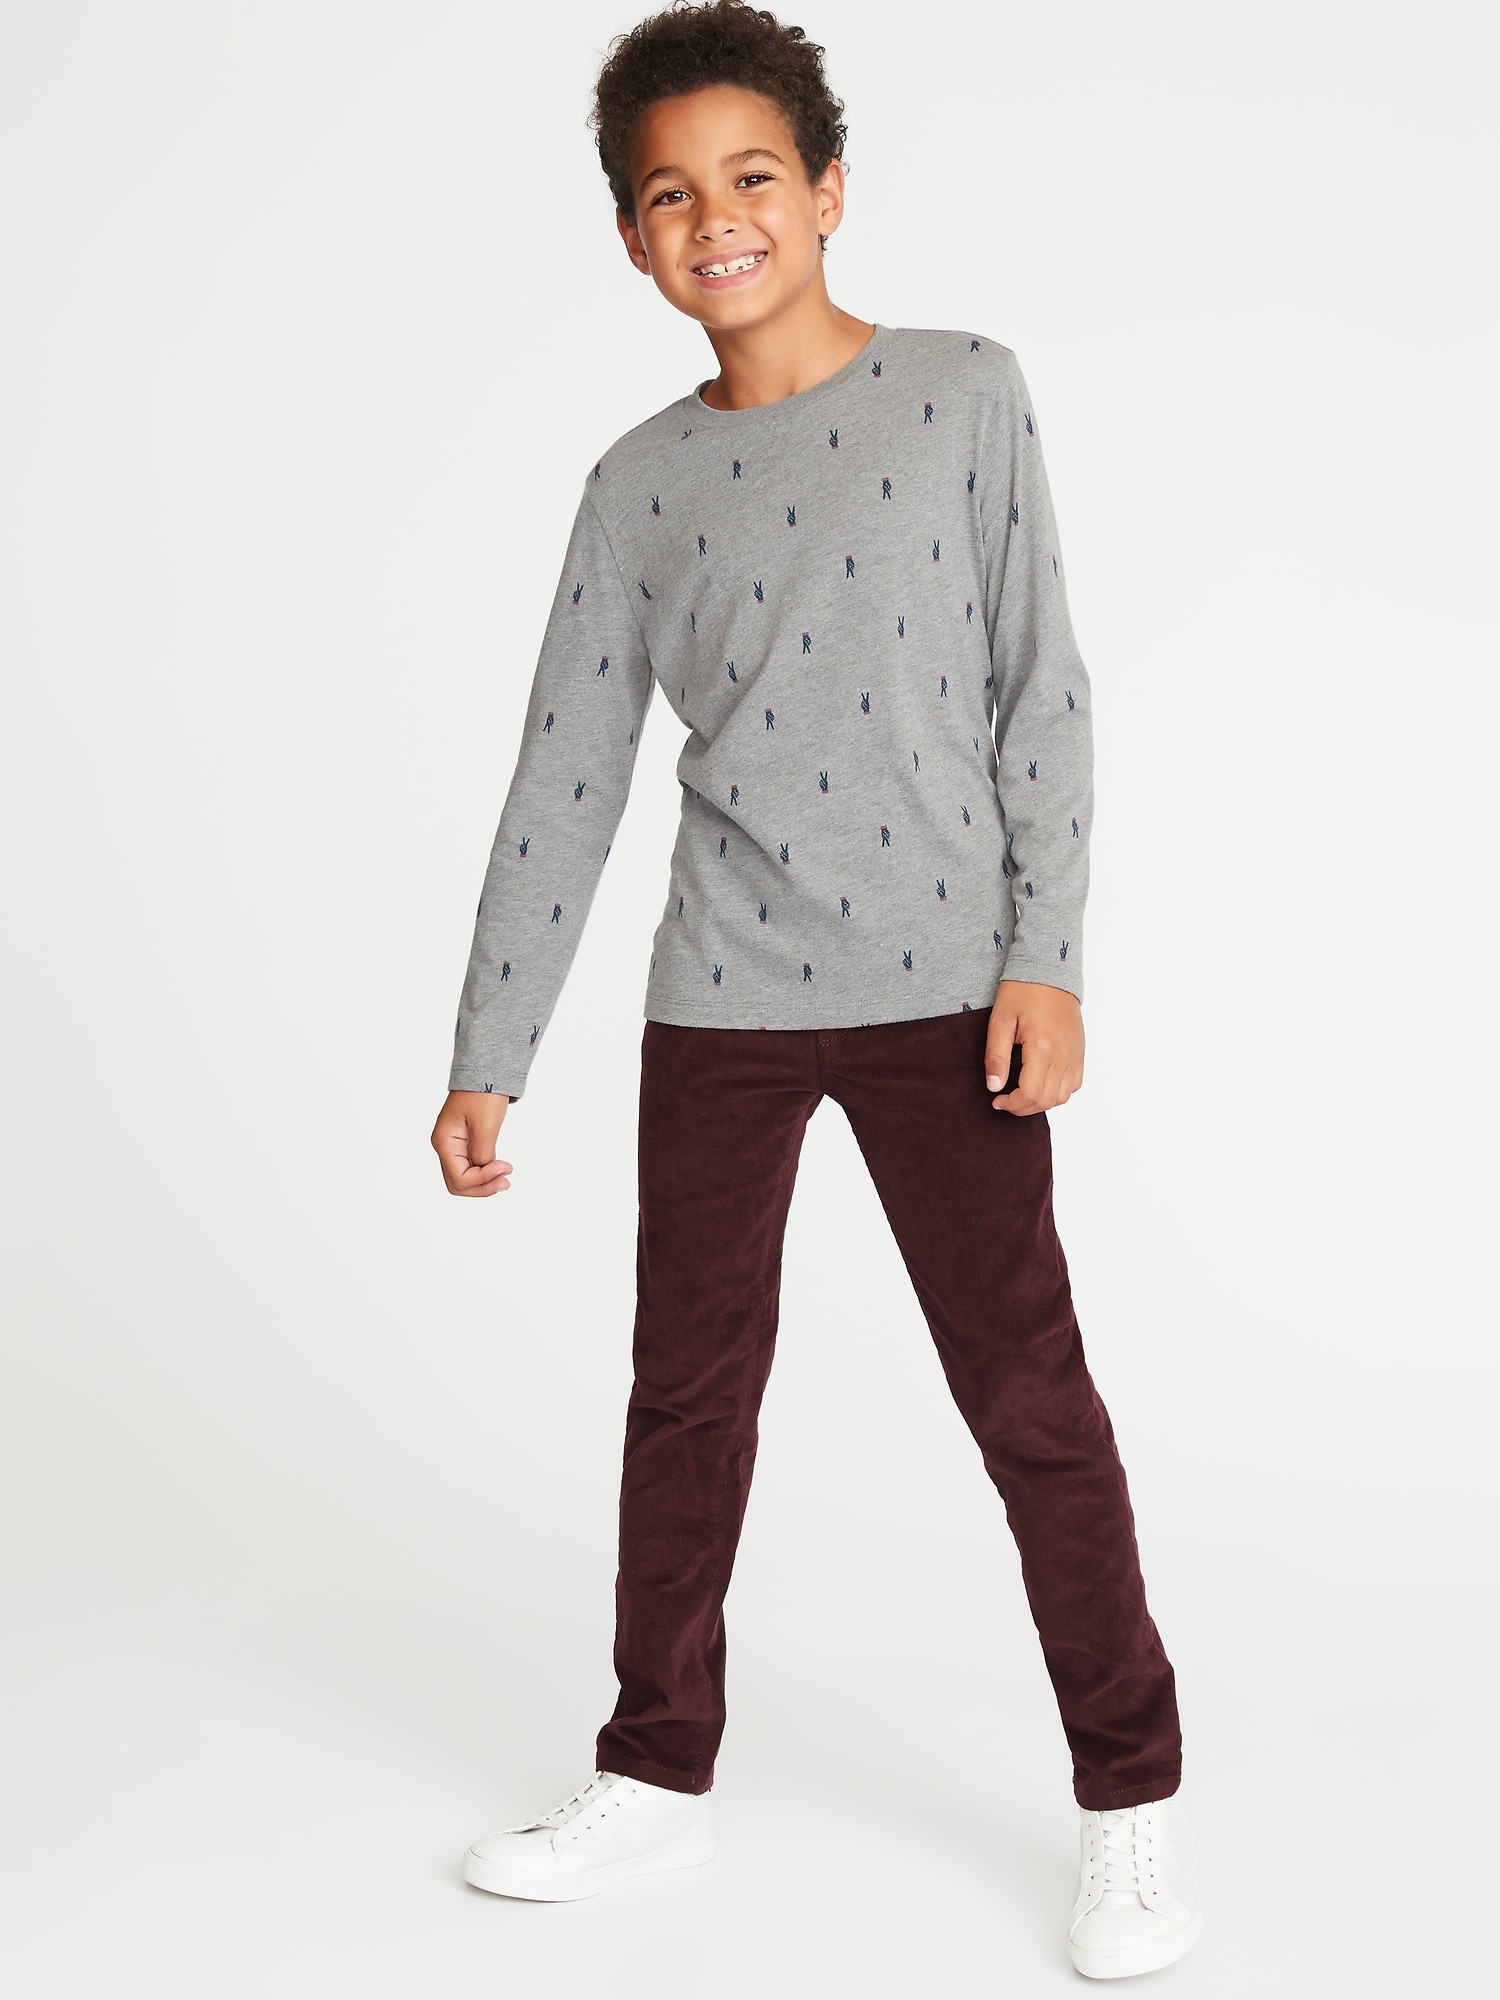 Printed Crew-Neck Tee For Boys | Old Navy